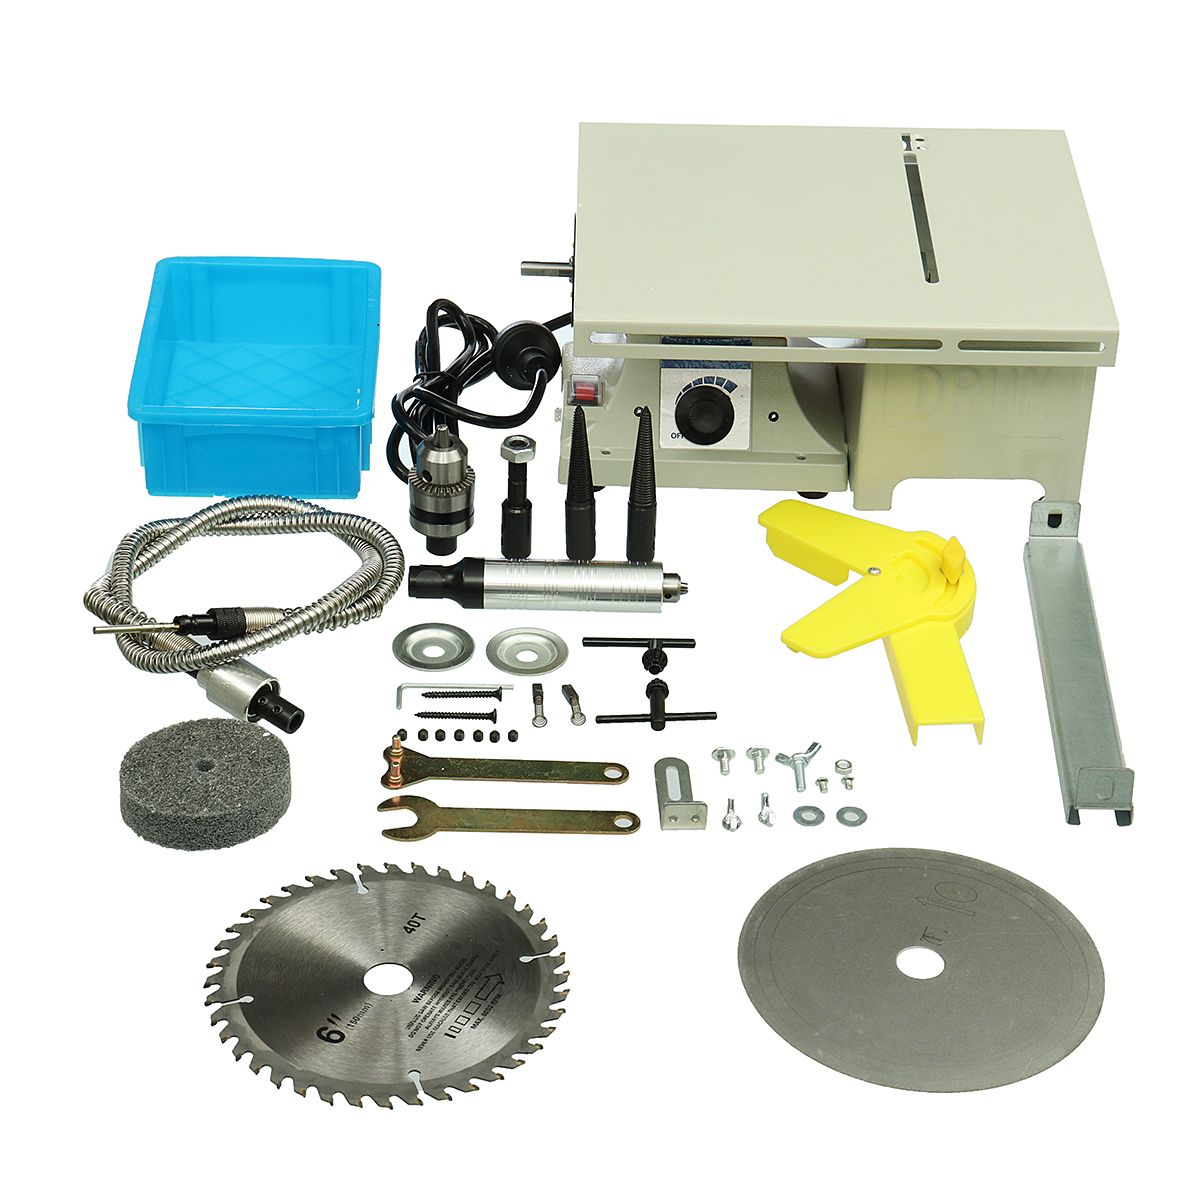 350W-Mini-Table-Bench-Saws-Woodworking-Bench-Lathe-Electric-Polisher-Grinder-Cutting-Saw-Power-Tools-1295975